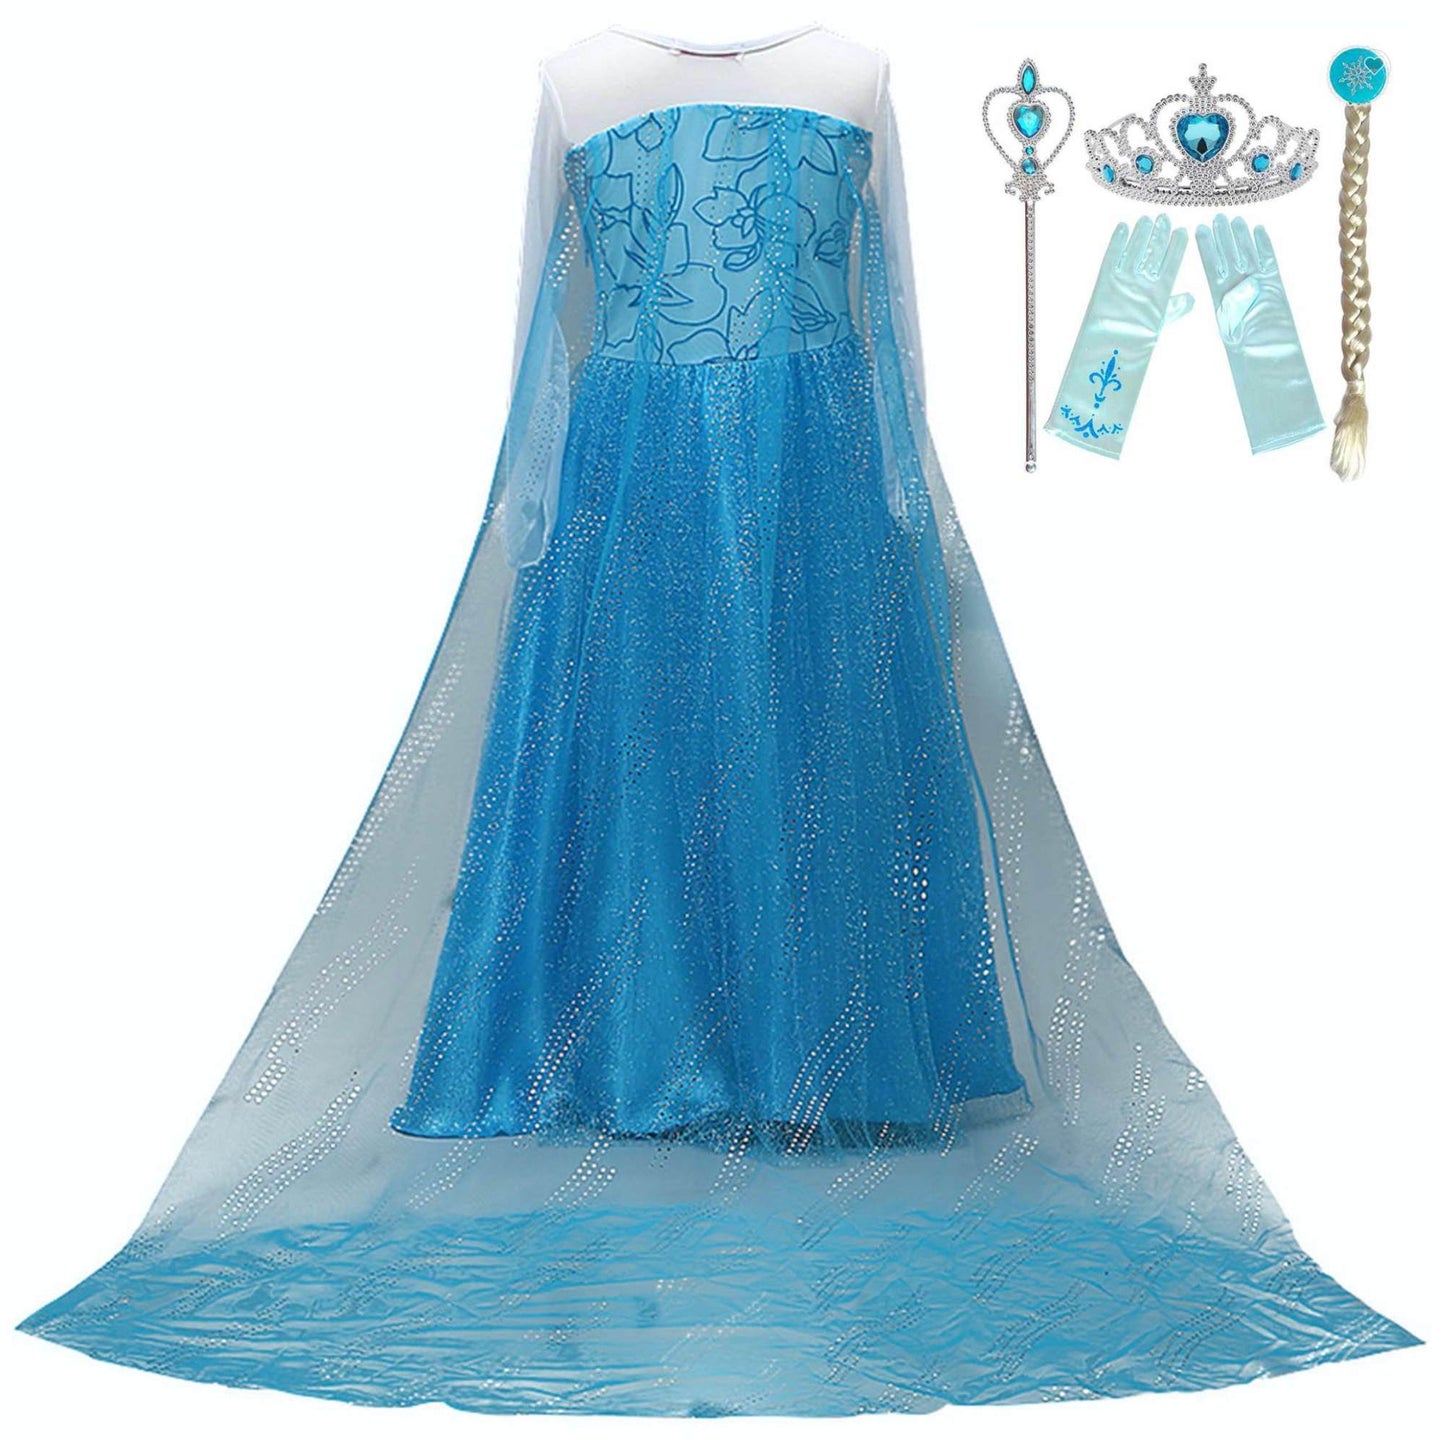 Elsa Costume, Frozen Toddler Girl, Blue Princess Dress, Girl Costume Cosplay, Outfit, Dress with Cape, Dress with accessories